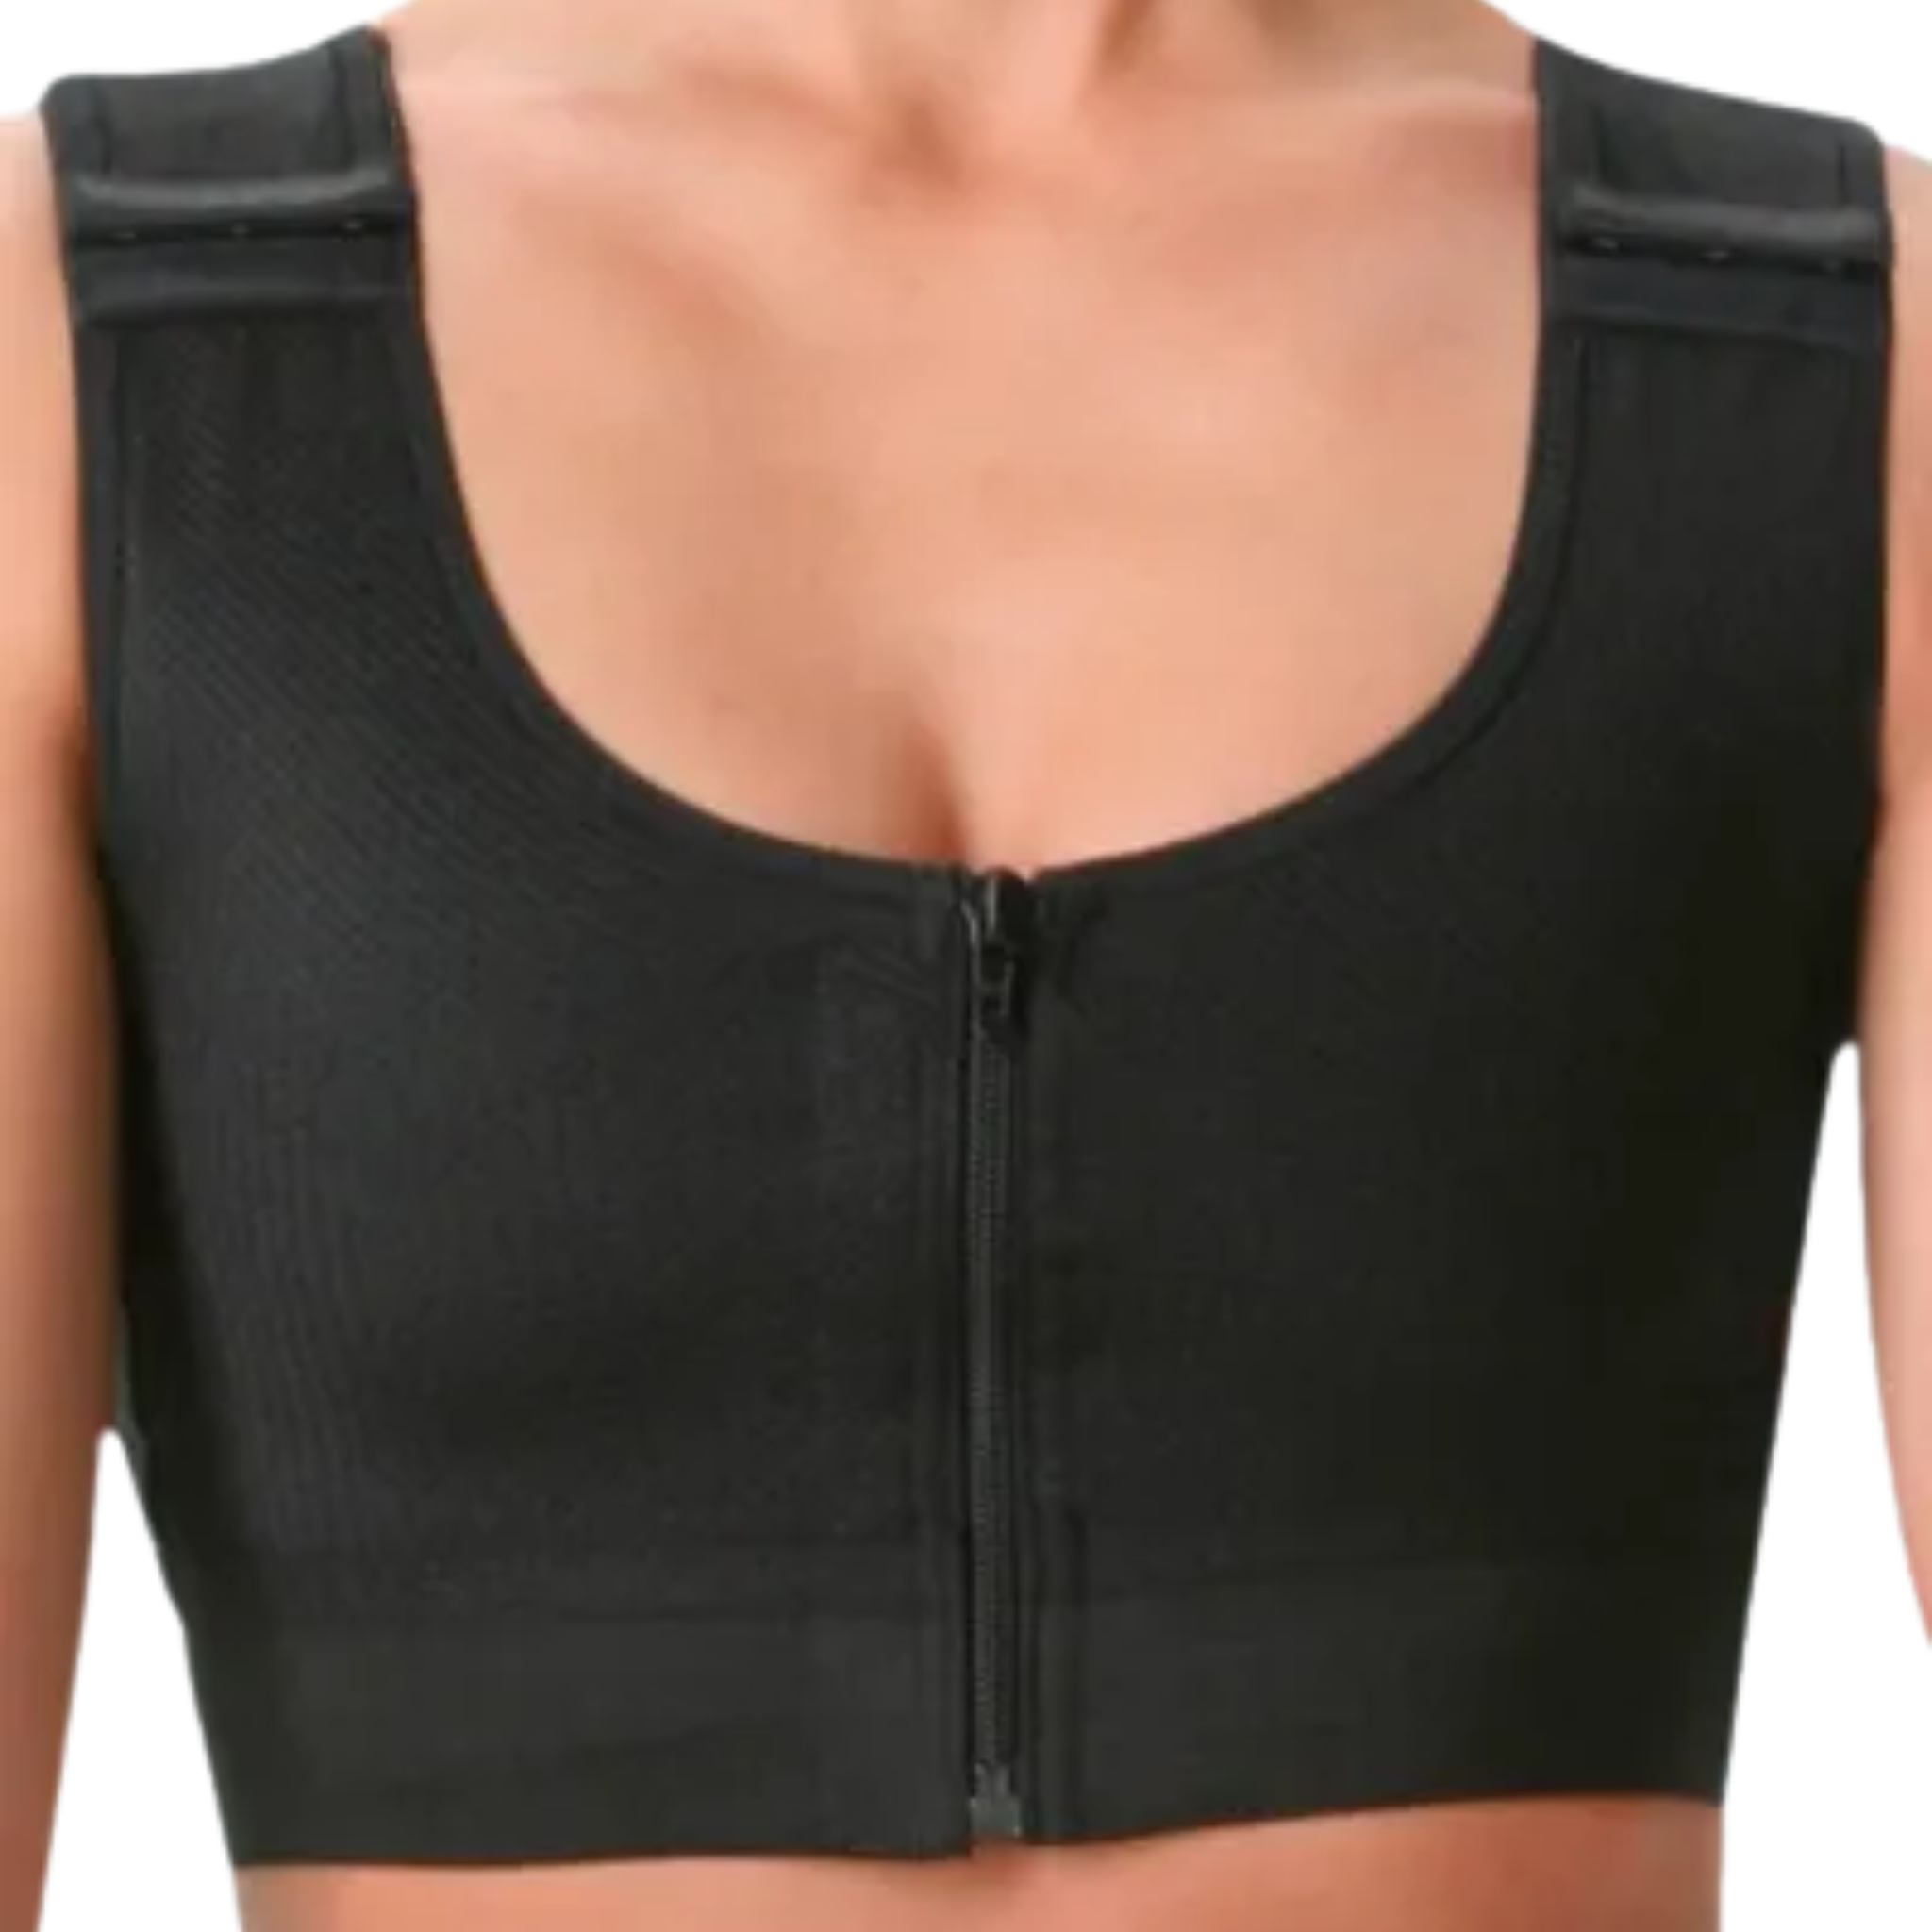 Supportive Shaping Compression Bra | lipomed